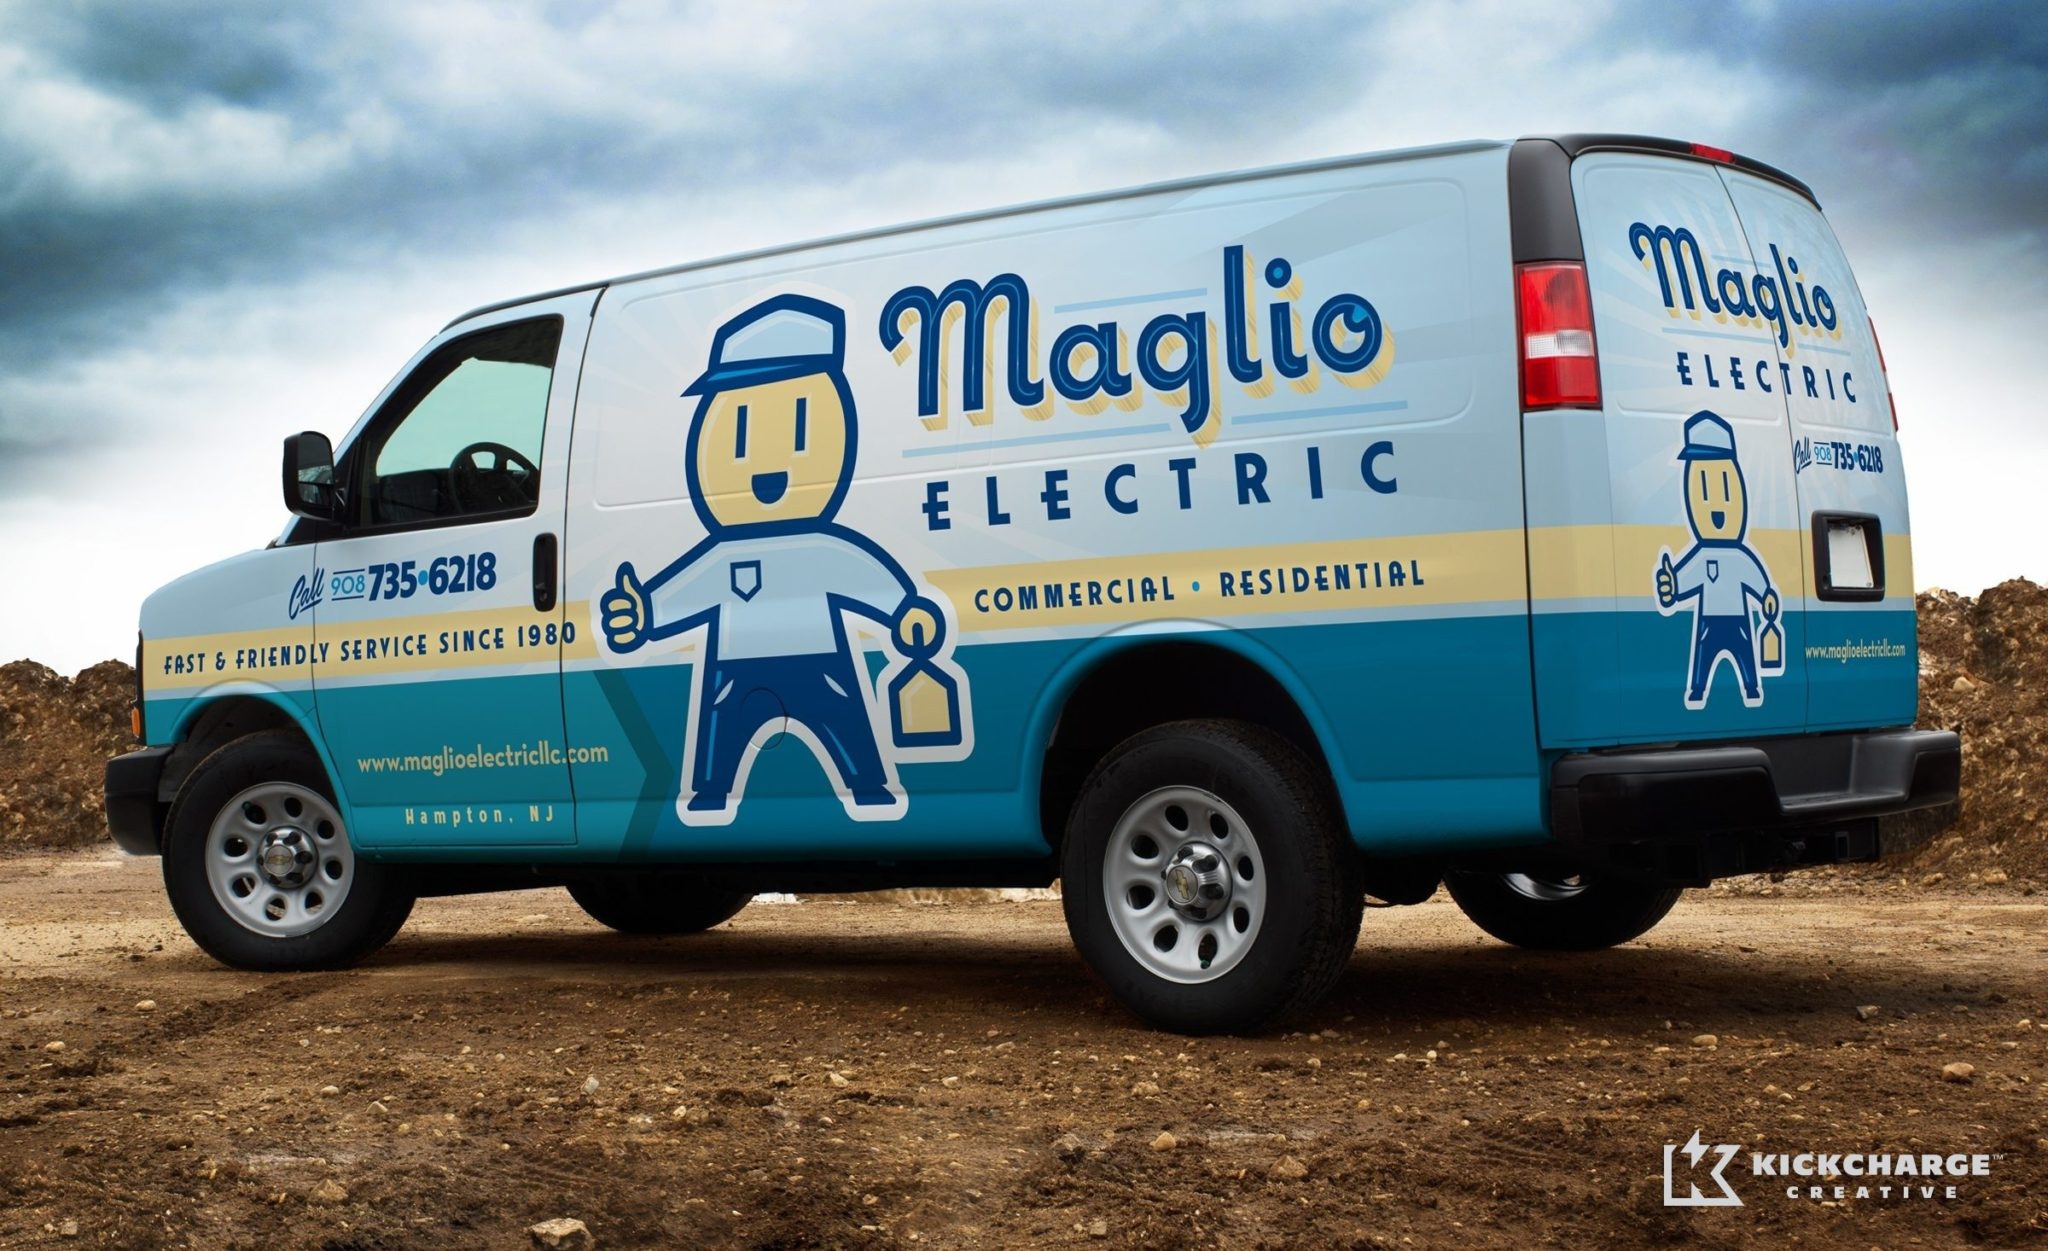 After designing the logo for this Hampton, NJ electrician, we then designed their vehicles. Can you find the hidden outlet?